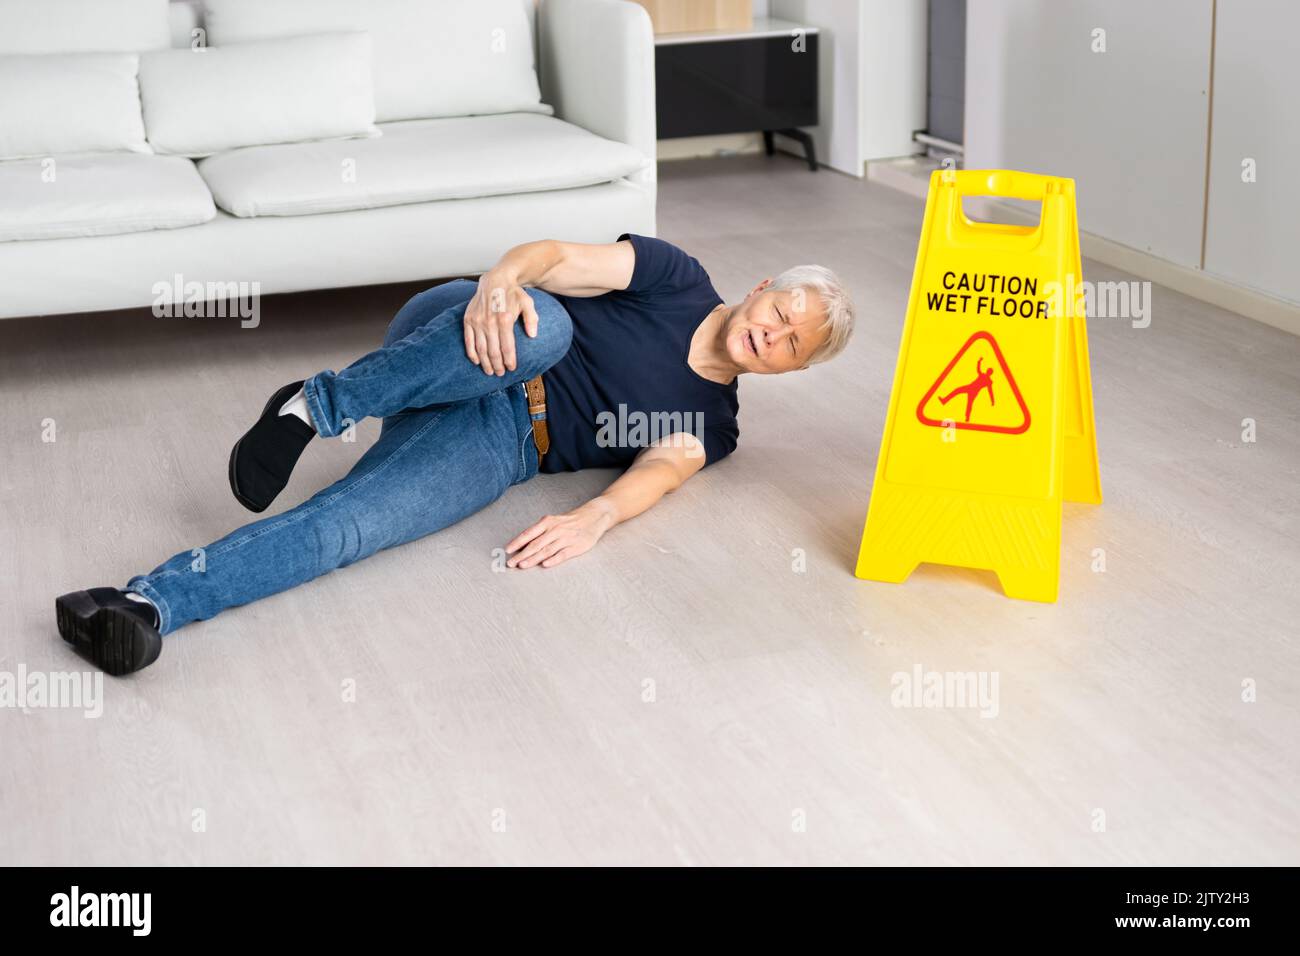 Slip Fall Accident. Floor Sign Caution And Safety Stock Photo